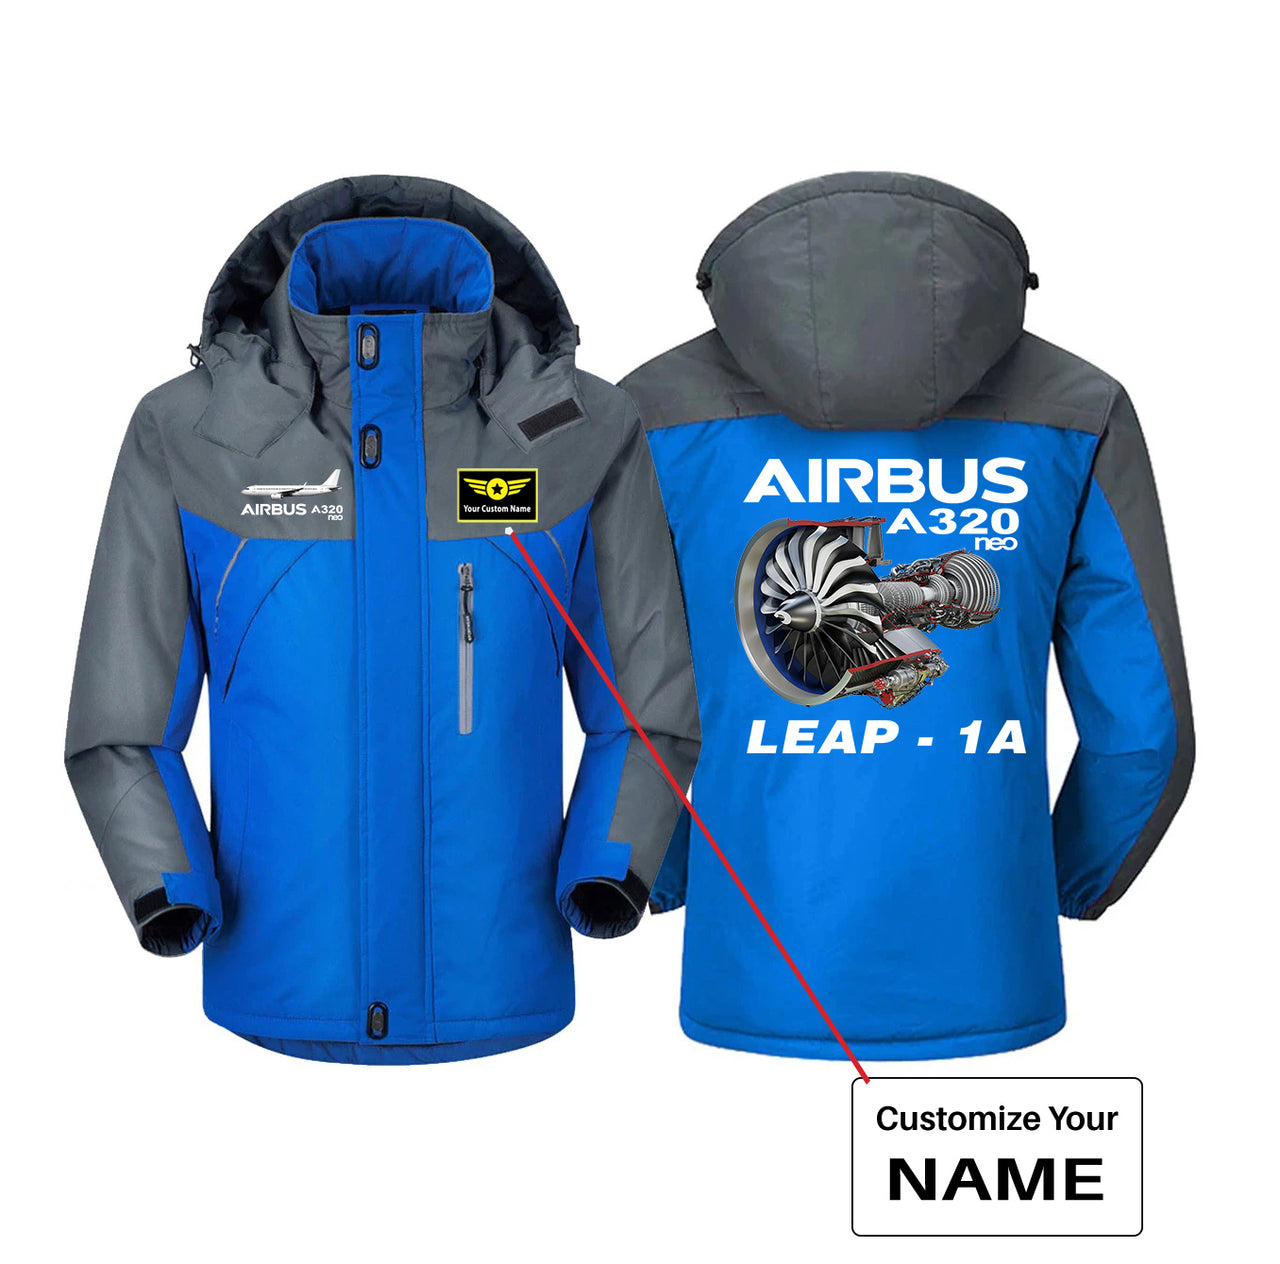 Airbus A320neo & Leap 1A Designed Thick Winter Jackets